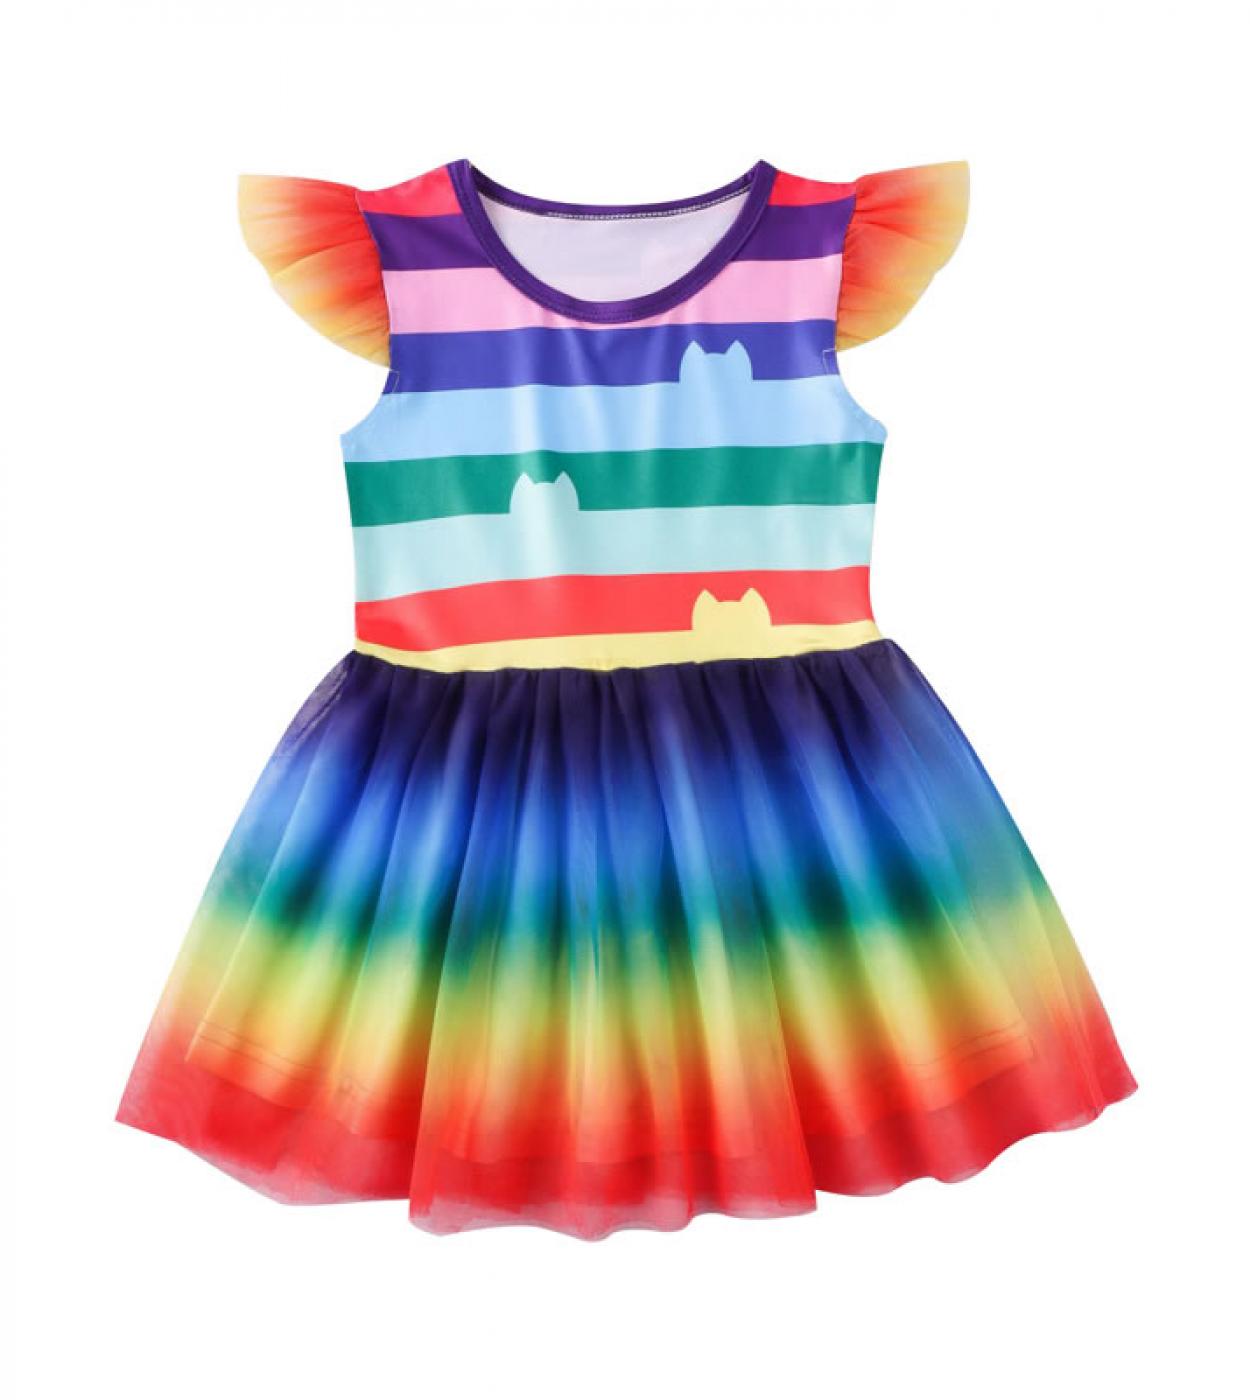 Summer Gabbys Dollhouse Costume For Baby Girl Lace Rainbow Dress Gabby Doll House Kid Up Striped Party Princess Frock